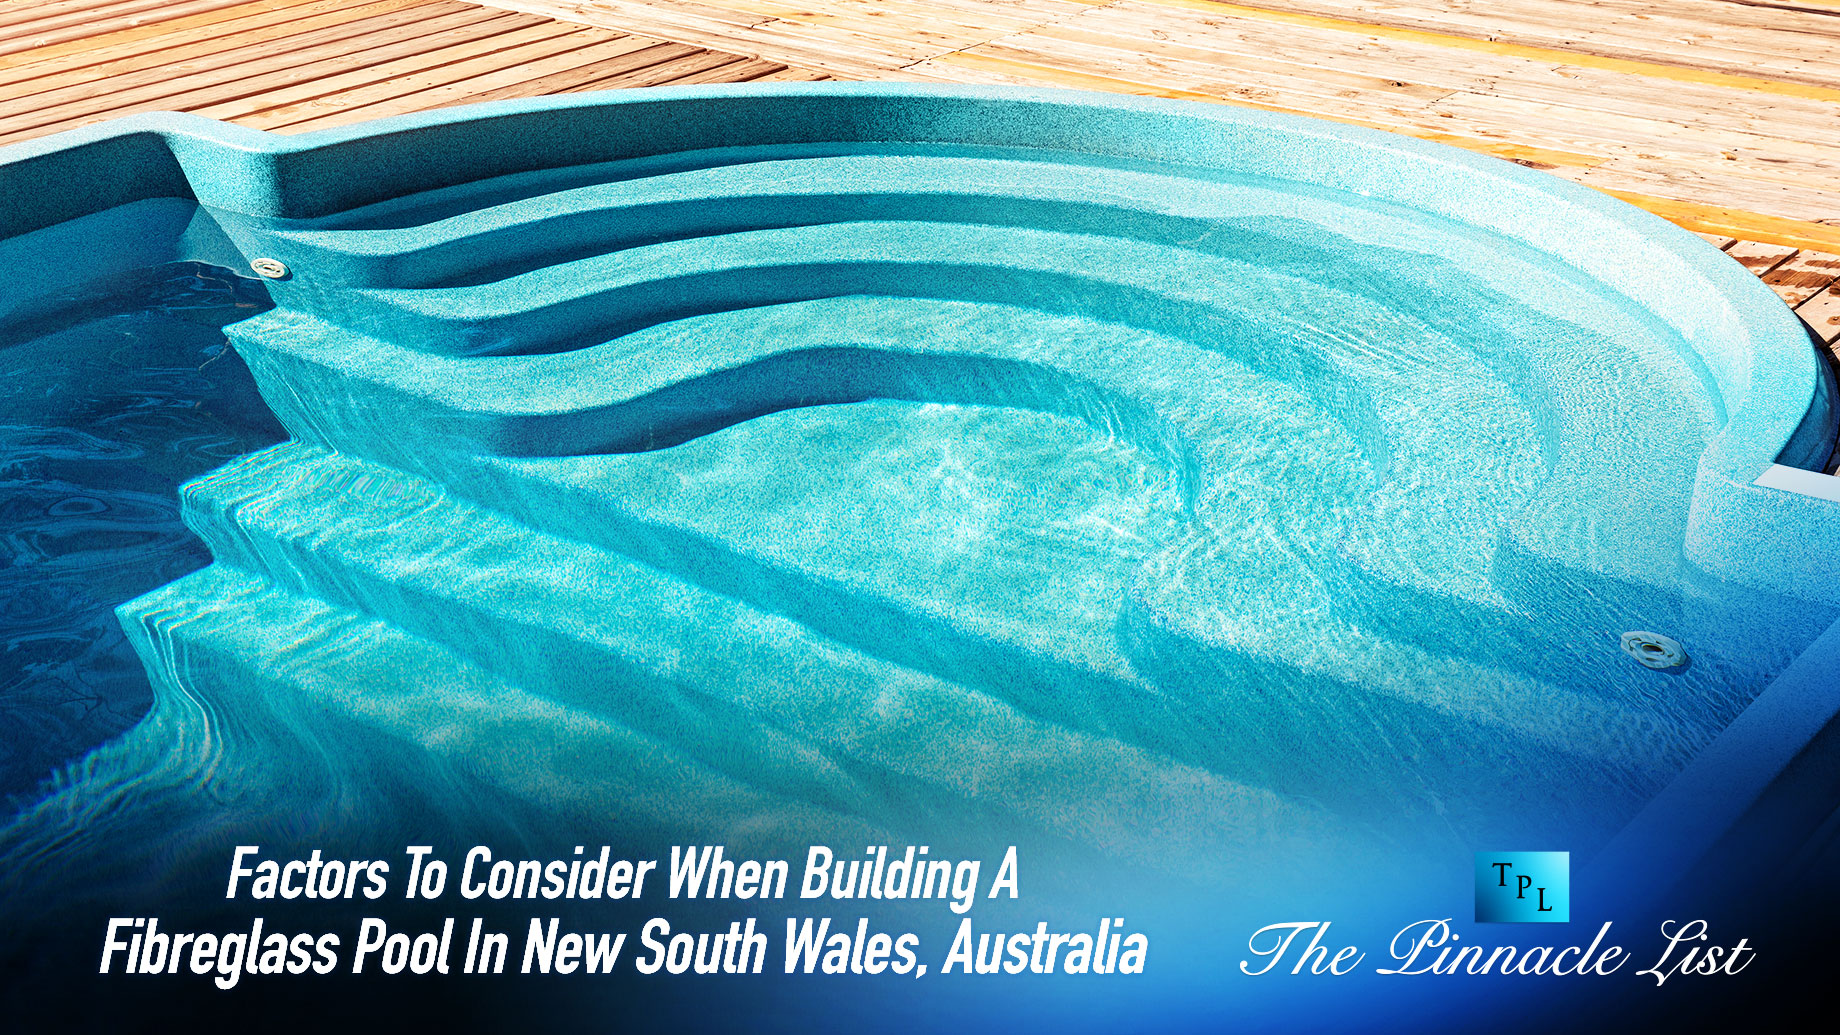 Factors To Consider When Building A Fibreglass Pool In New South Wales, Australia